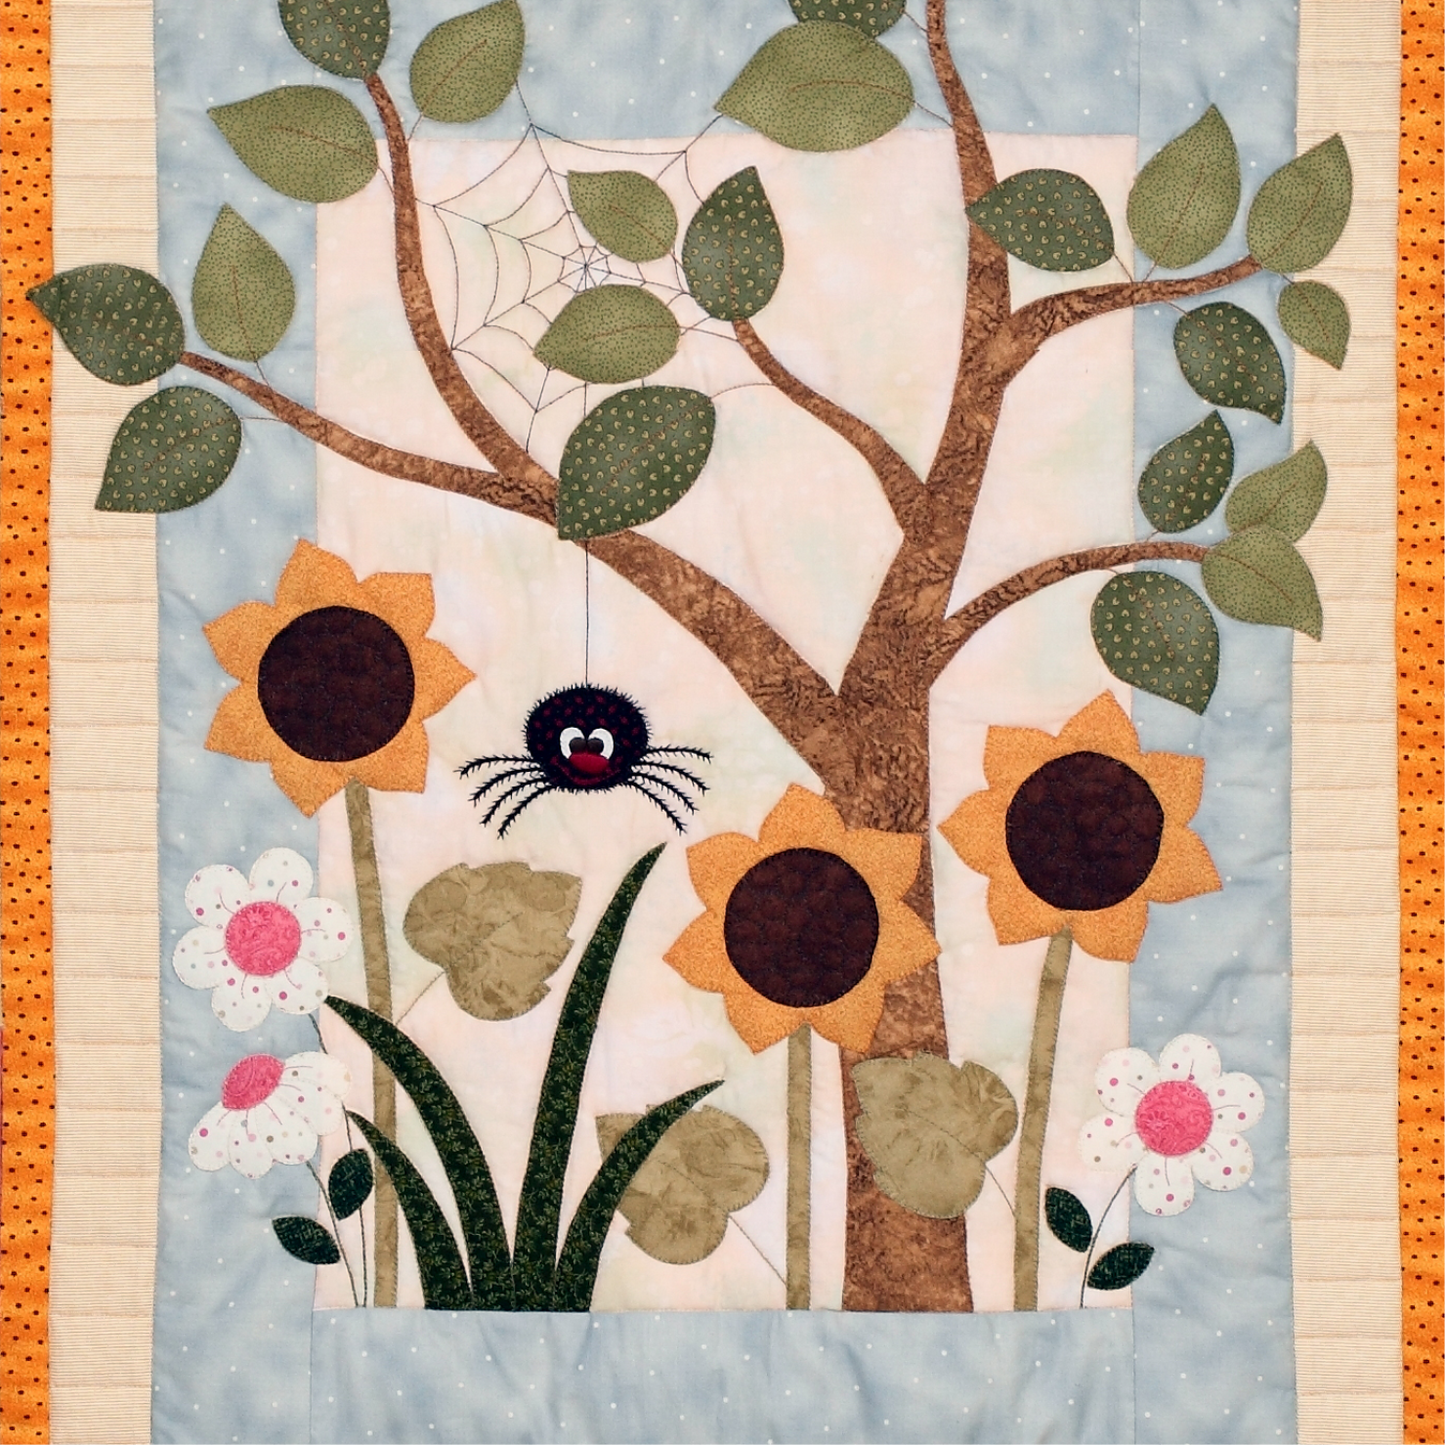 SNUGGLE BUGS QUILT